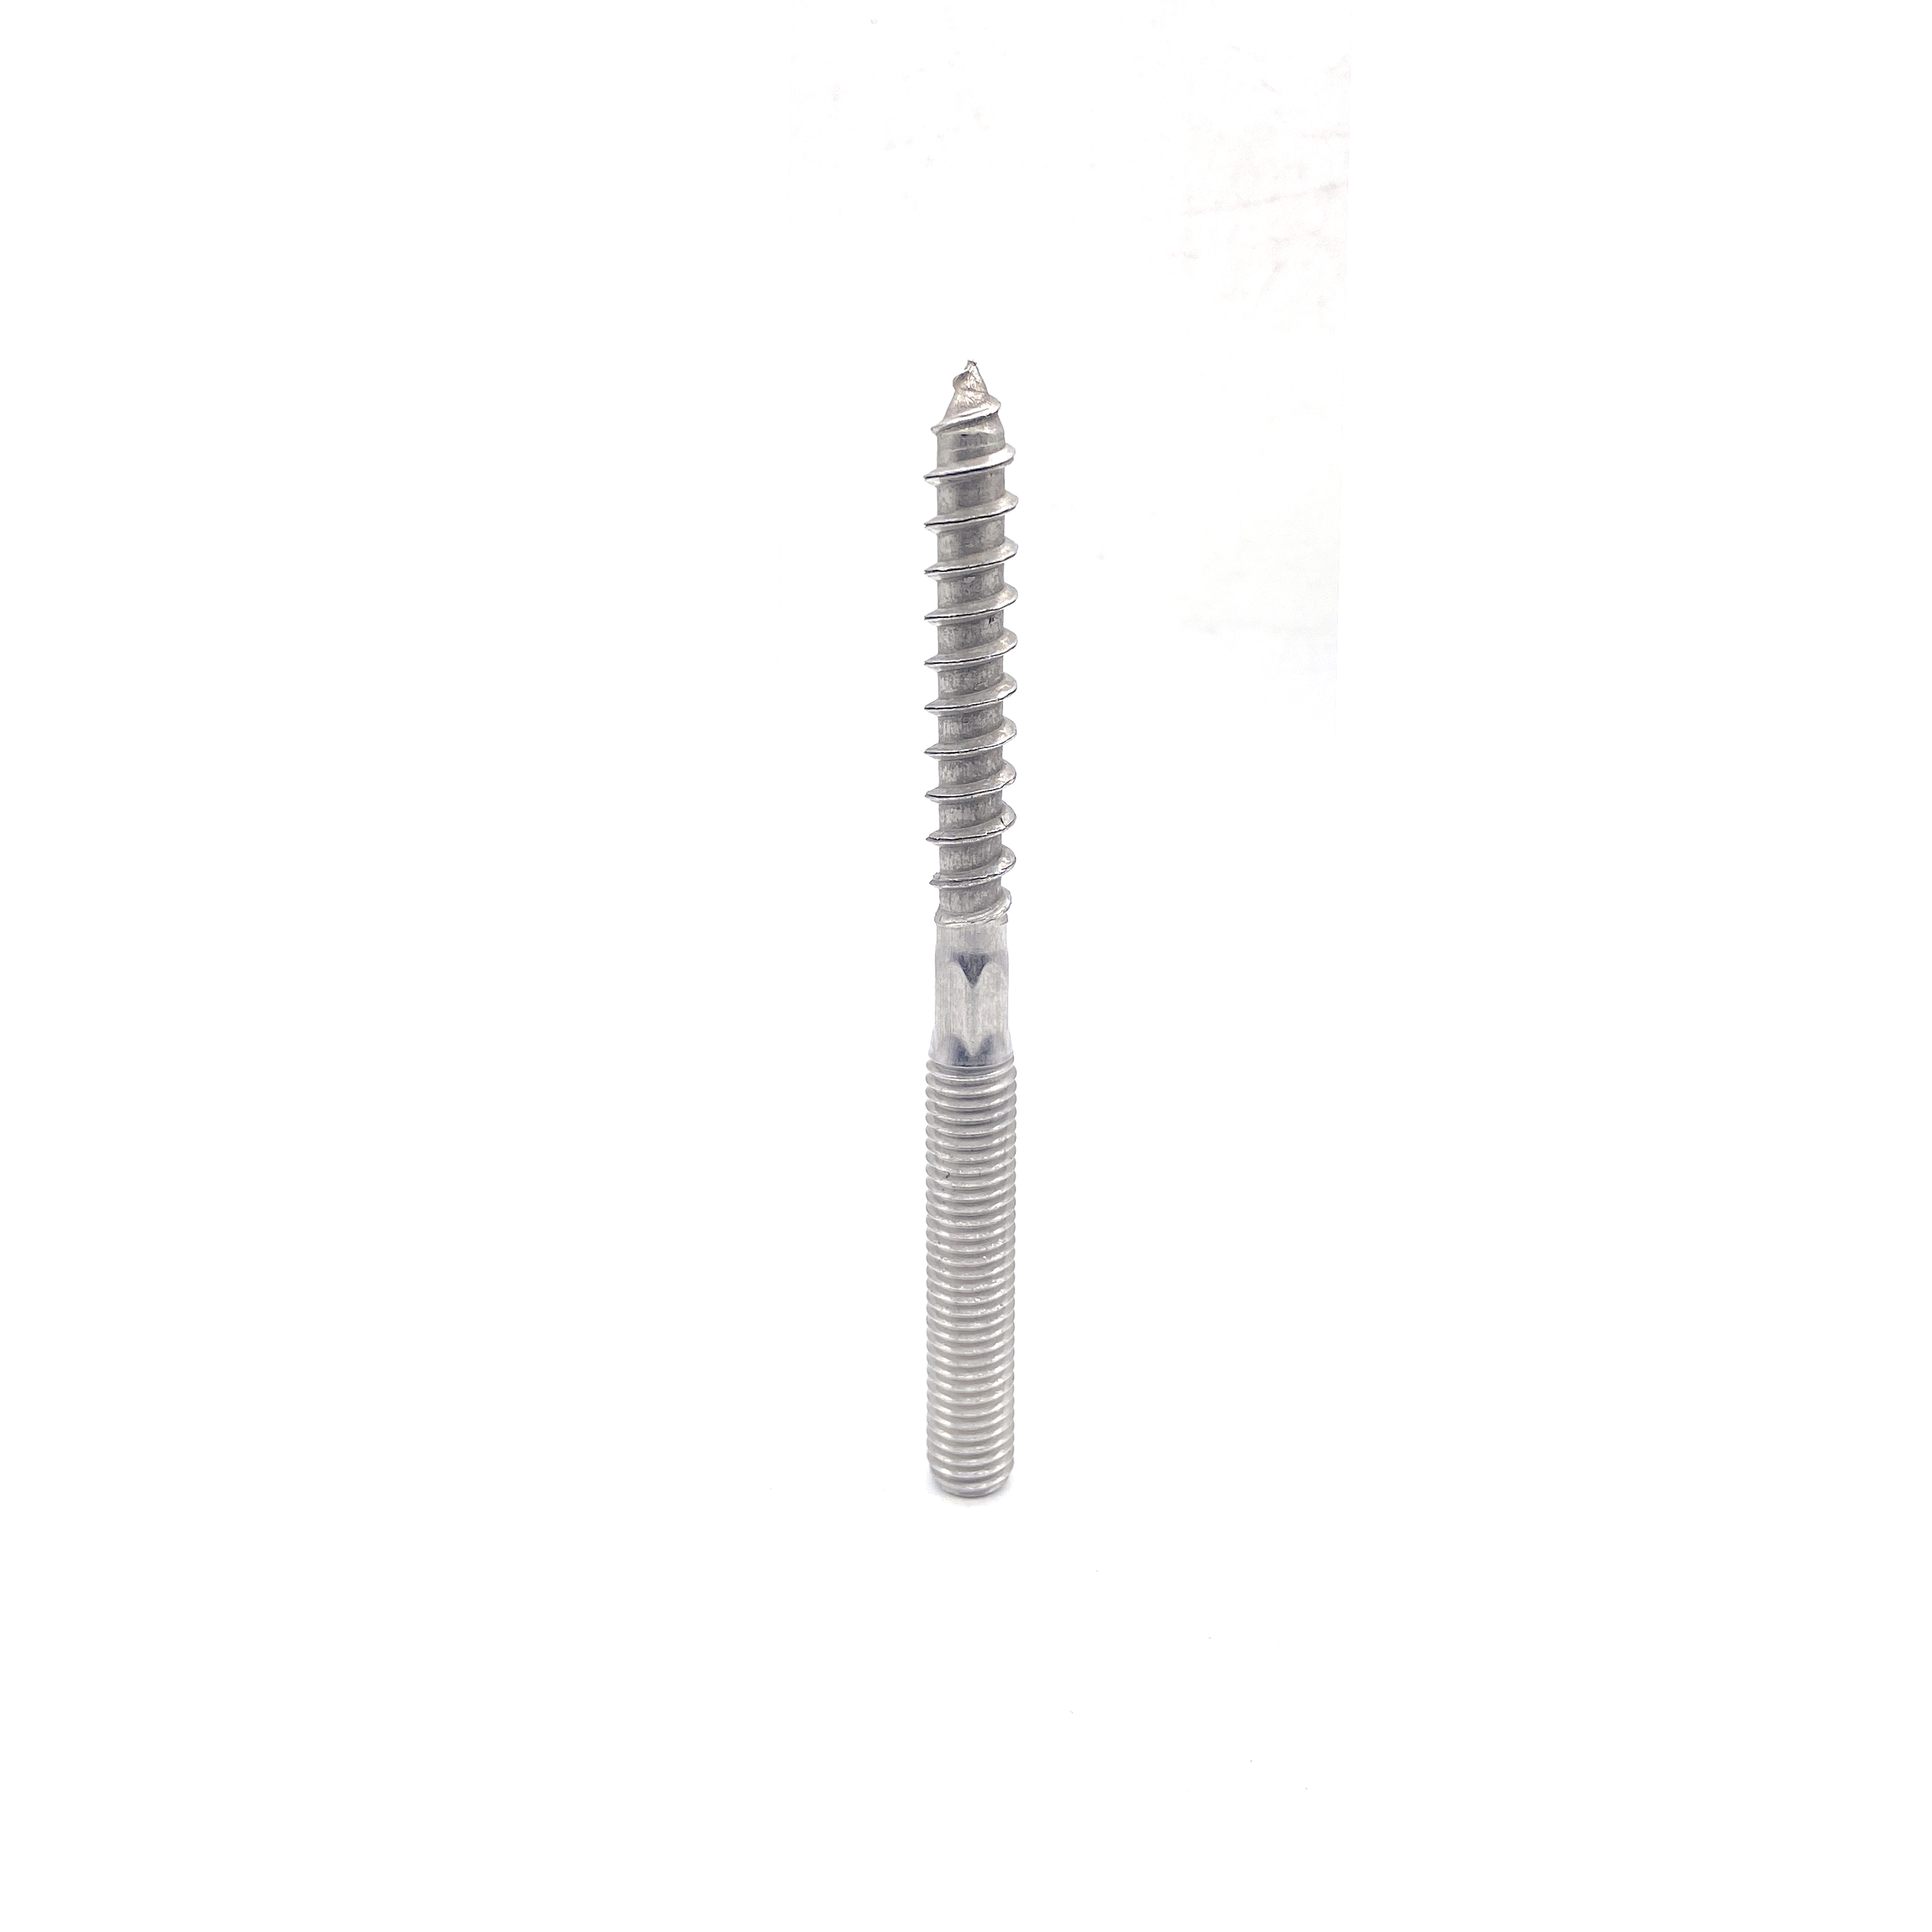 Stainless Steel Wooded Thread Double End Hanger Bolt